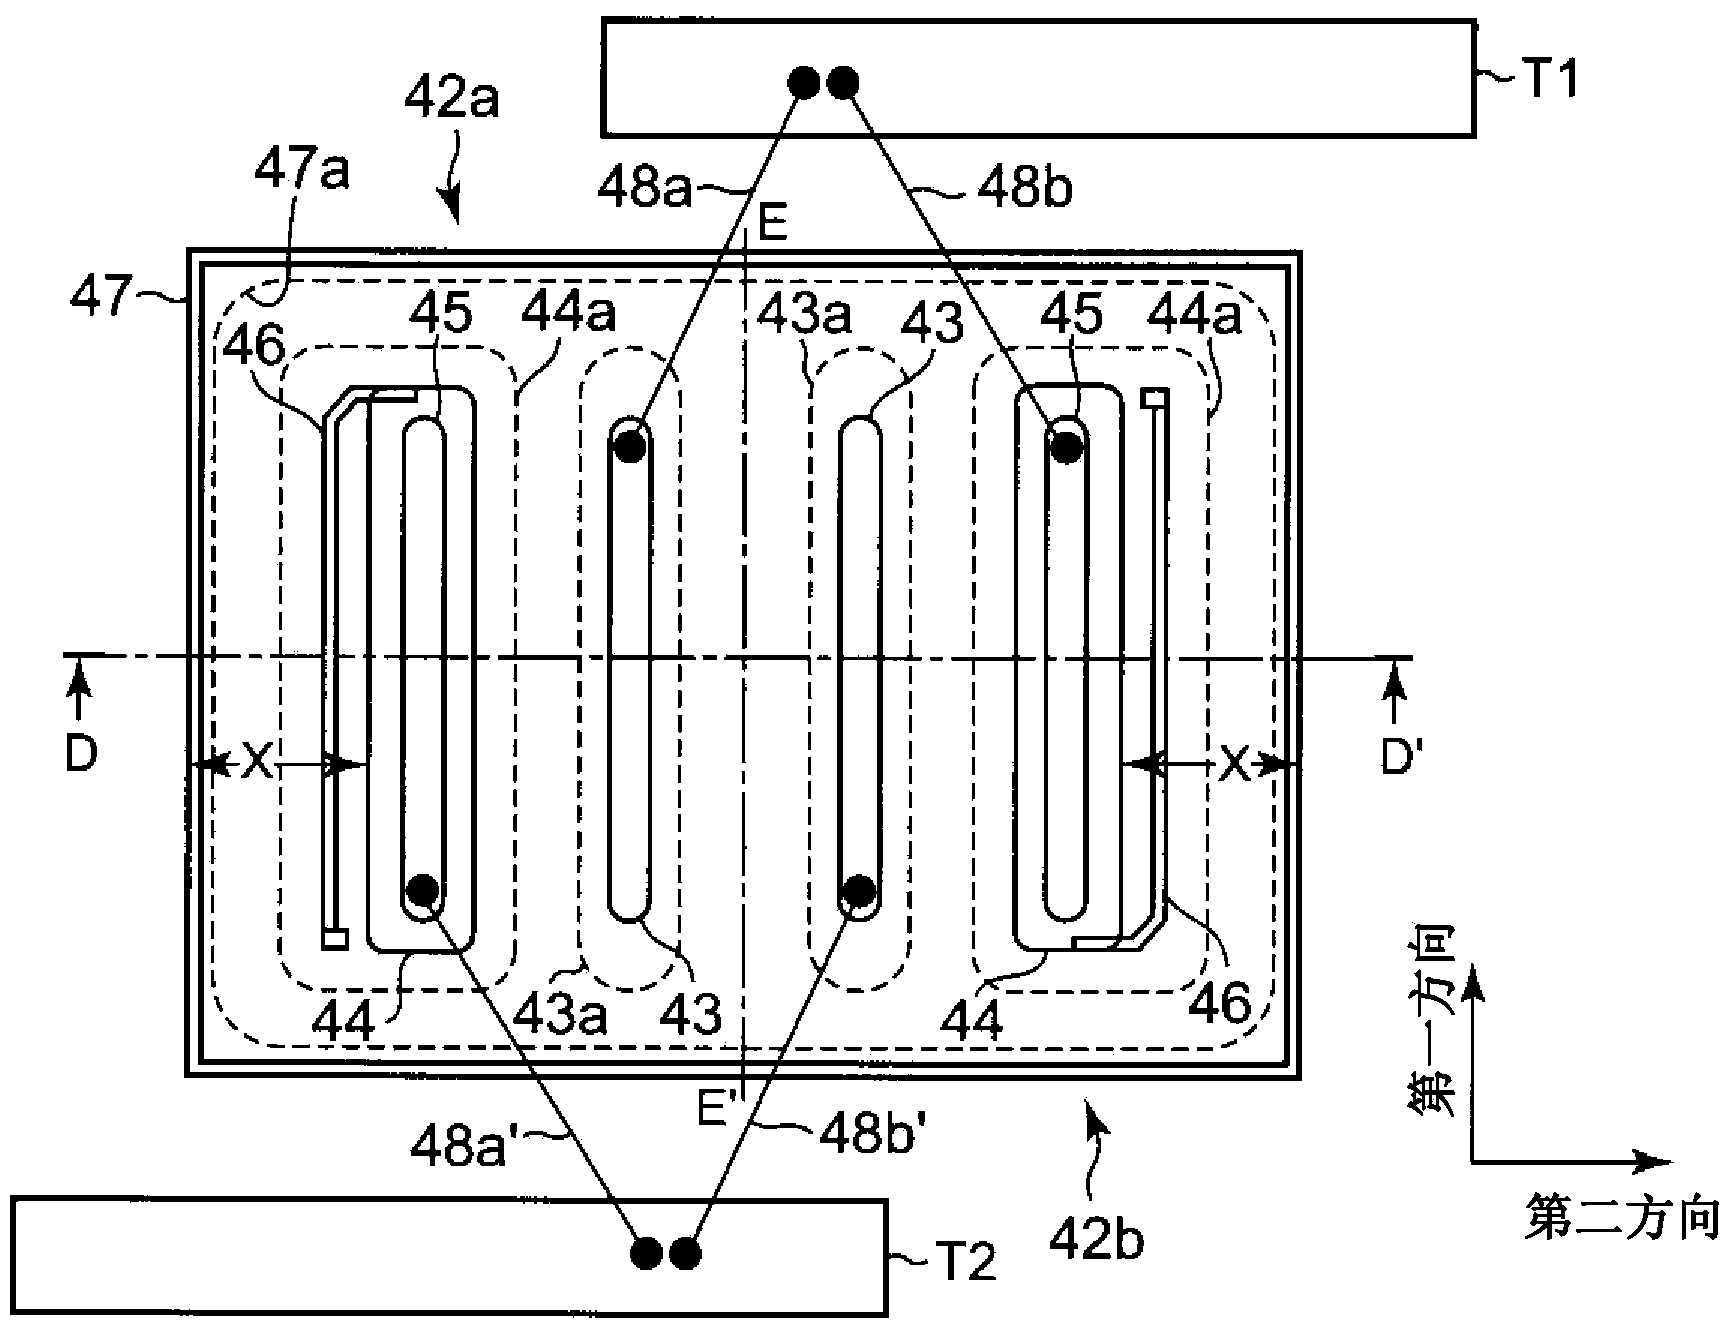 Bi-directional light control thyratron transistor chip, optical triggering coupler and solid-state relay